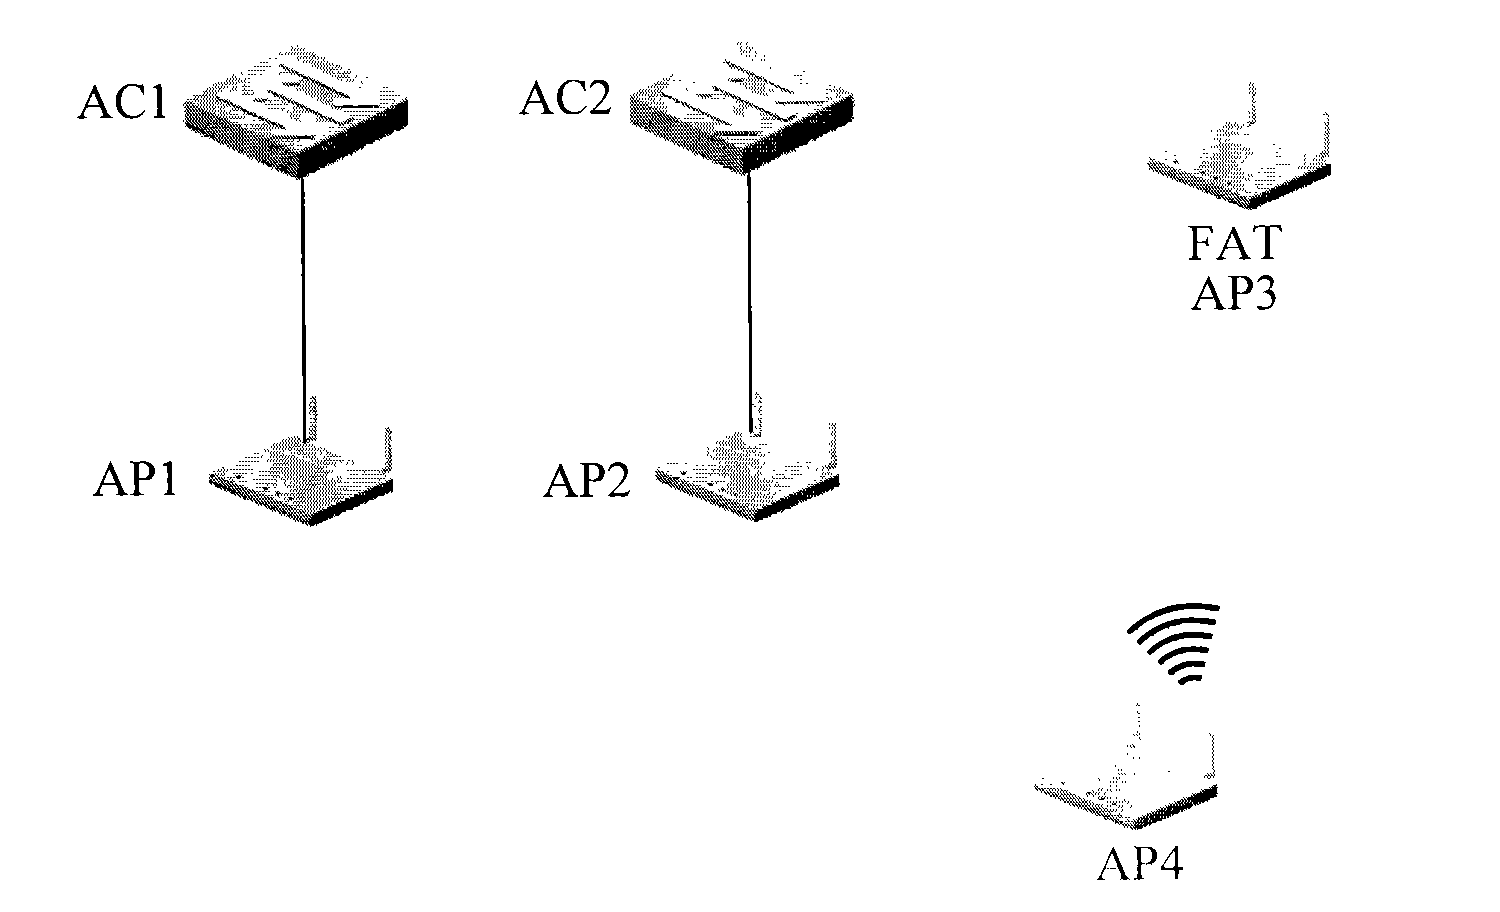 Configuration acquiring method, zero configuration access point and neighbor access point